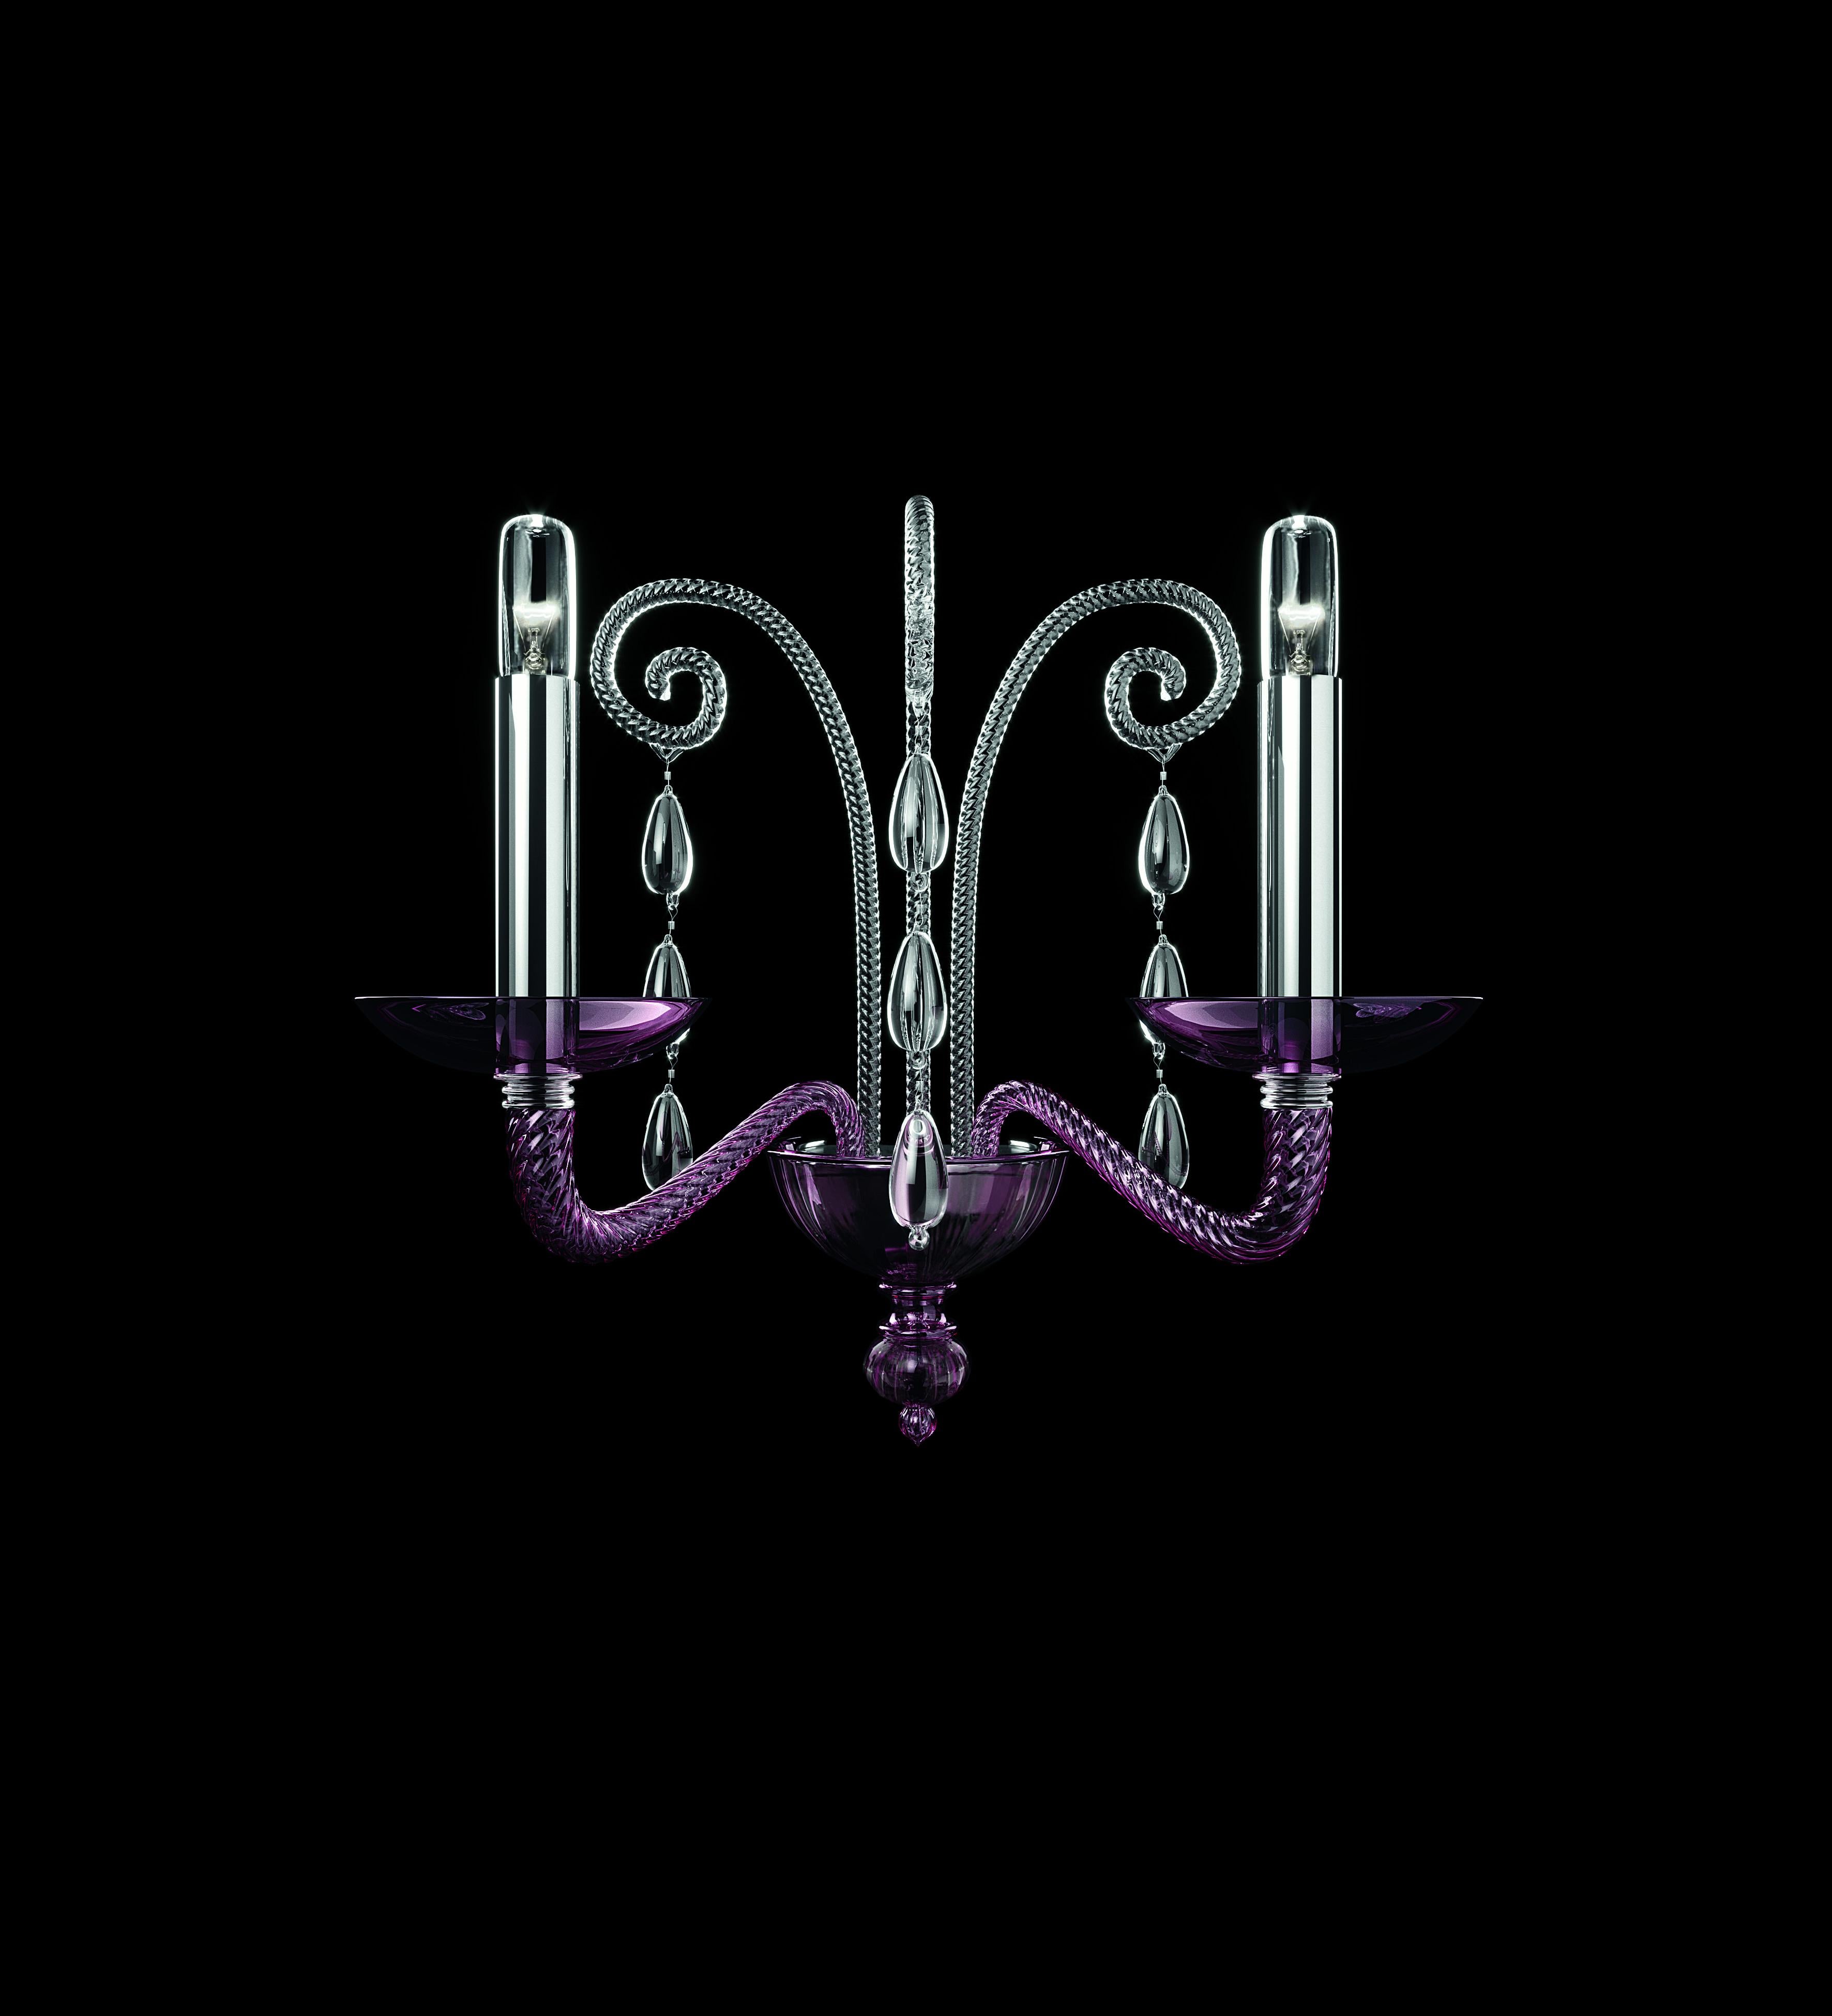 Purple (Violet_VI) Taymyr 5589 02 Wall Sconce in Glass with Polished Chrome Finish, by Barovier 2